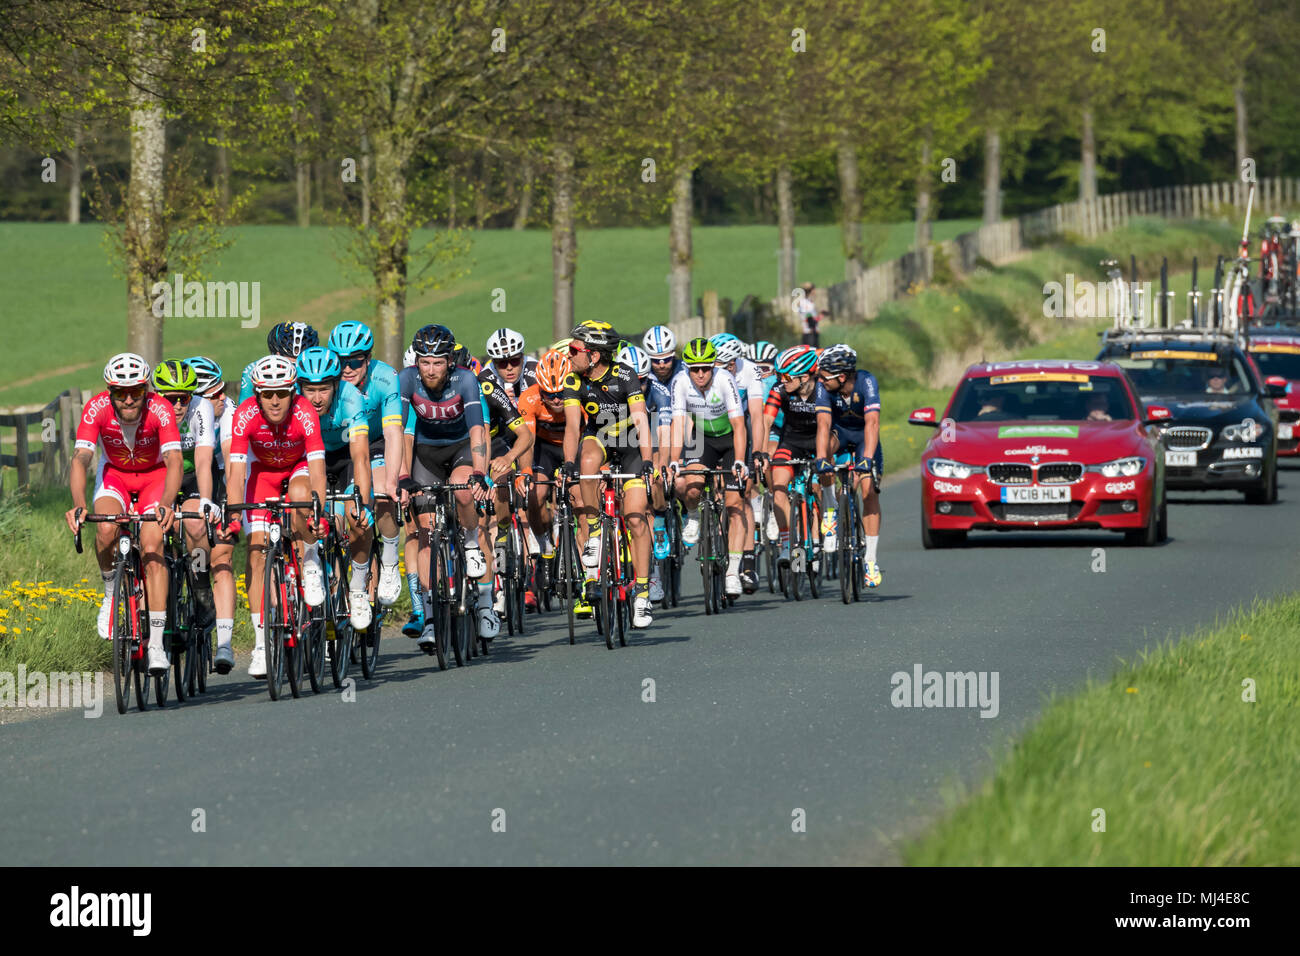 Denton, West Yorkshire, 4th May 2018. Large group of male cyclists in the pelaton, competing in the sunny Tour de Yorkshire 2018, are racing past the grounds of Denton Hall, on a straight, flat, scenic, countryside lane, closely followed by a line of team cars - near Ilkley, North Yorkshire, England, UK. Credit: Ian Lamond/Alamy Live News Stock Photo